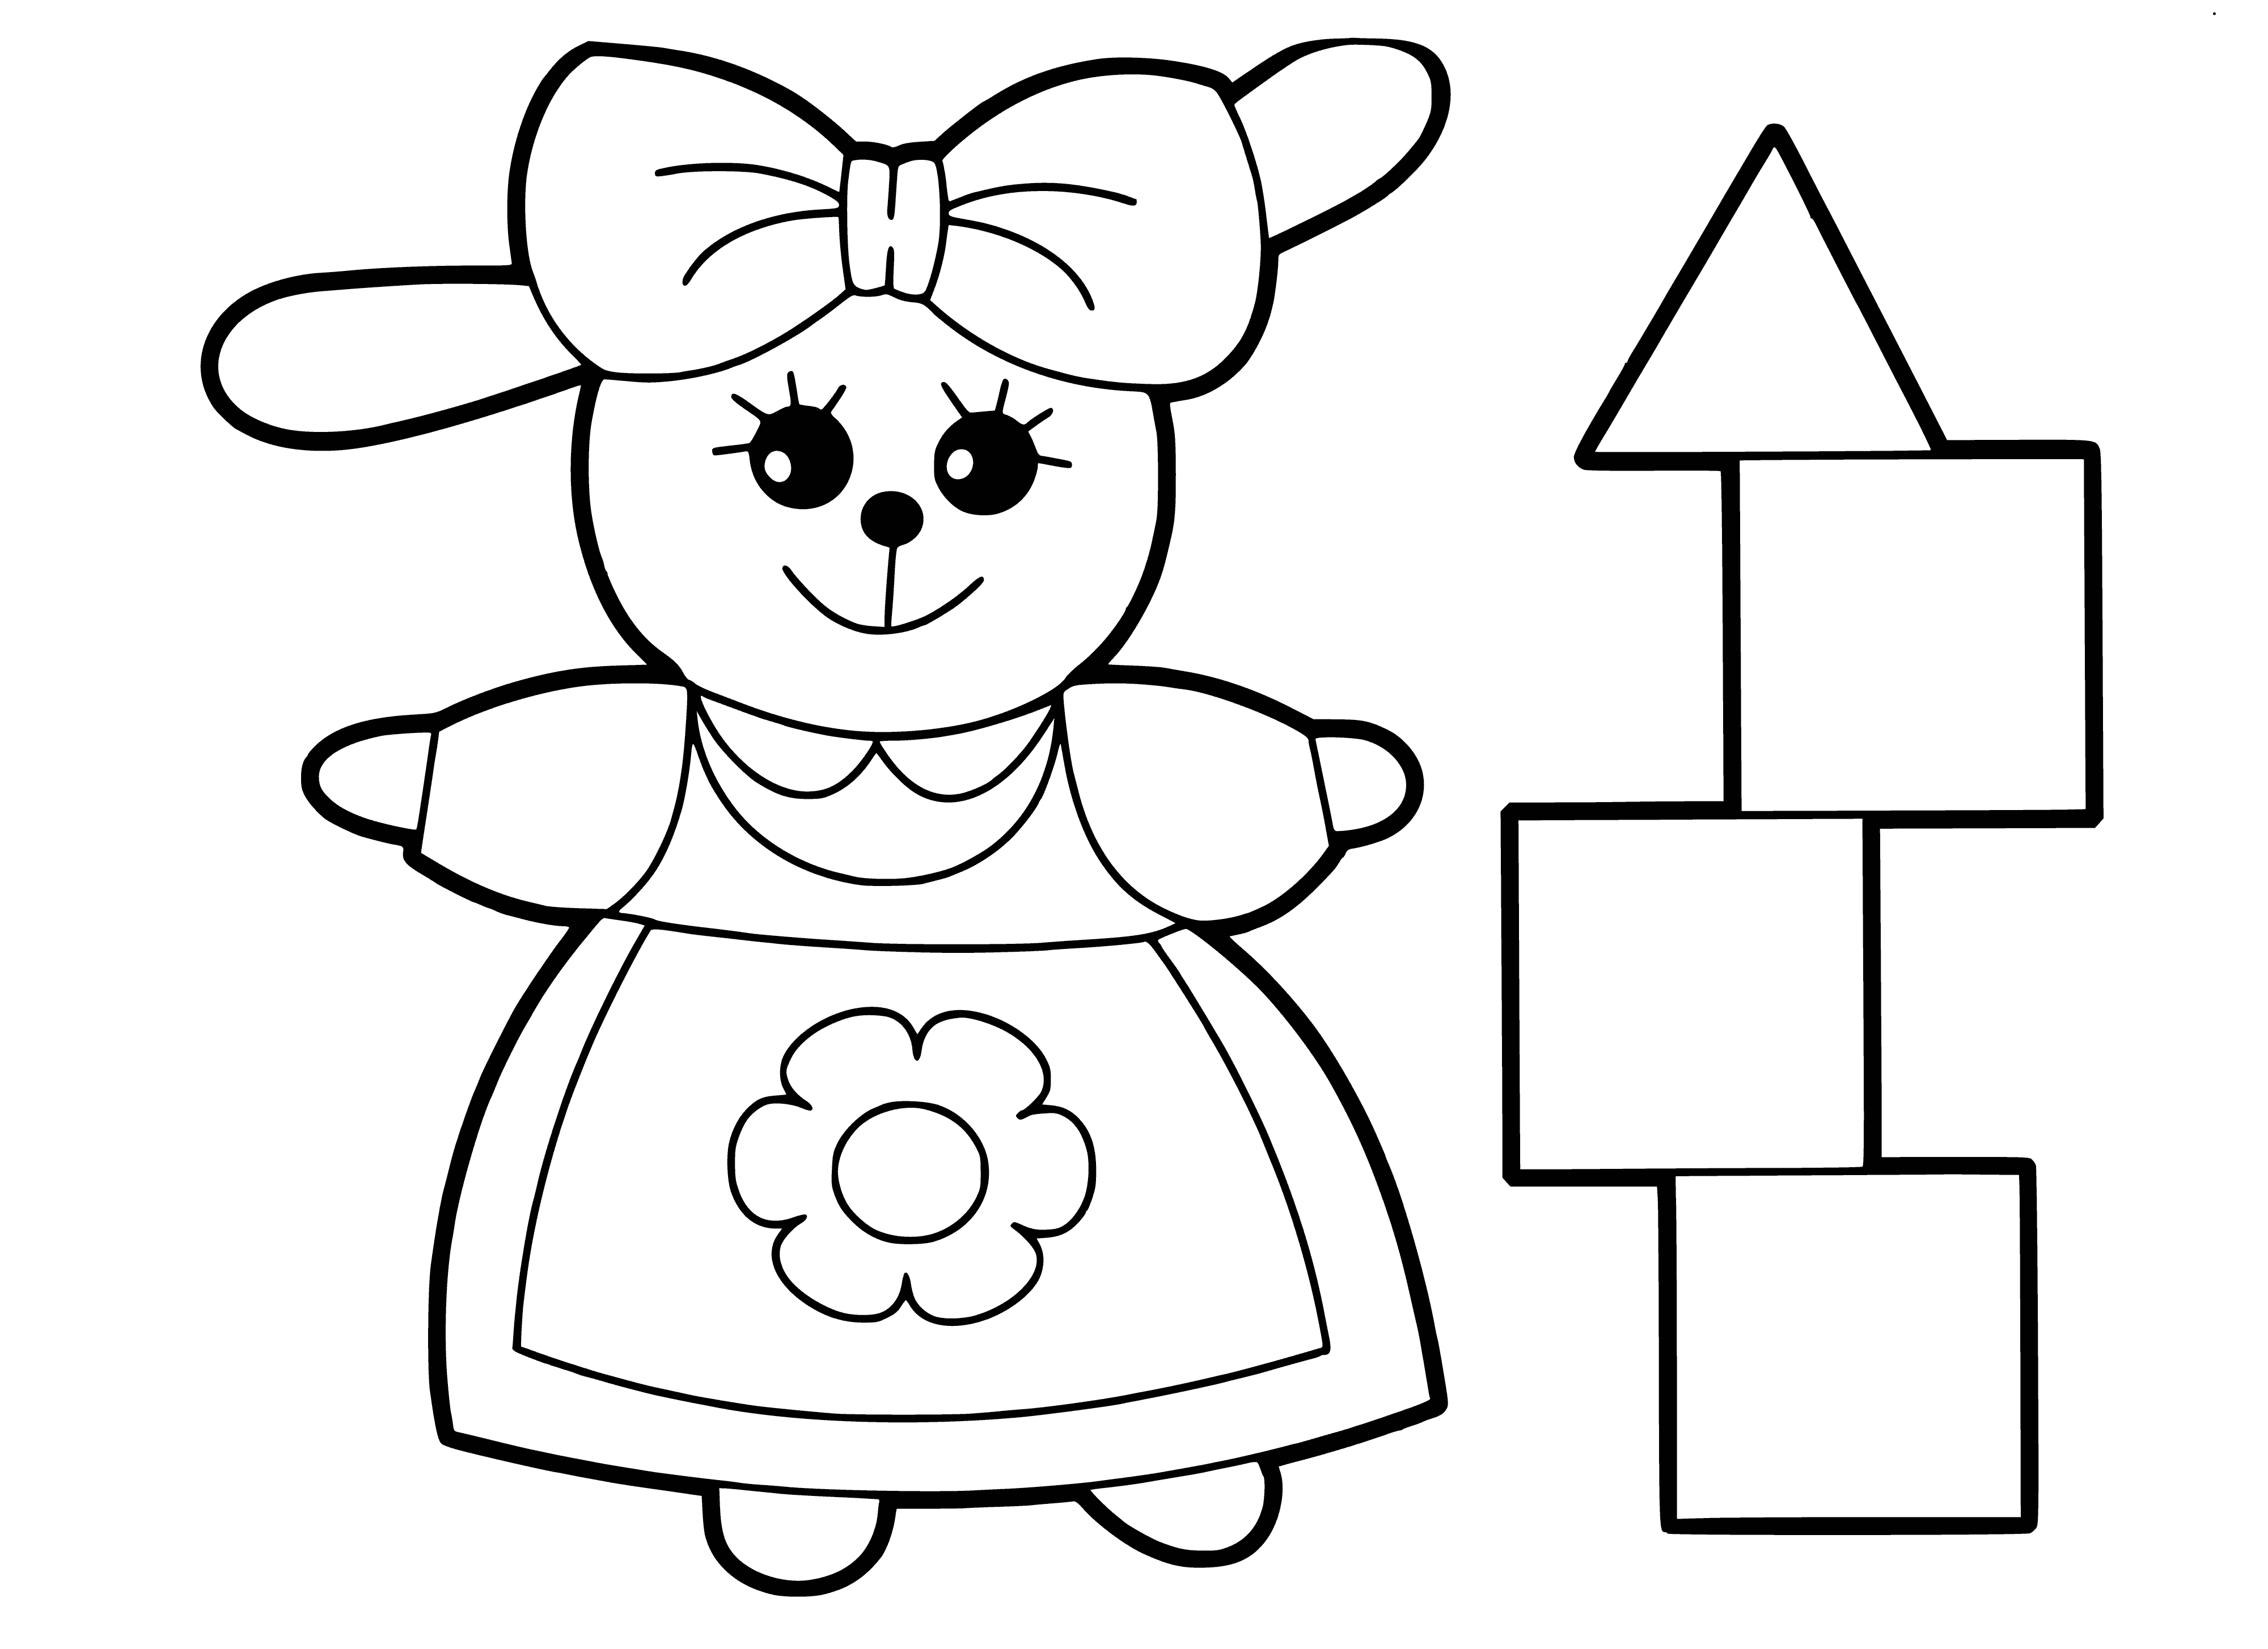 coloring page: Adorable bunny coloring page - brown body with white stomach, long tail, big ears, standing on hind legs and looking to the side. #coloring #bunny